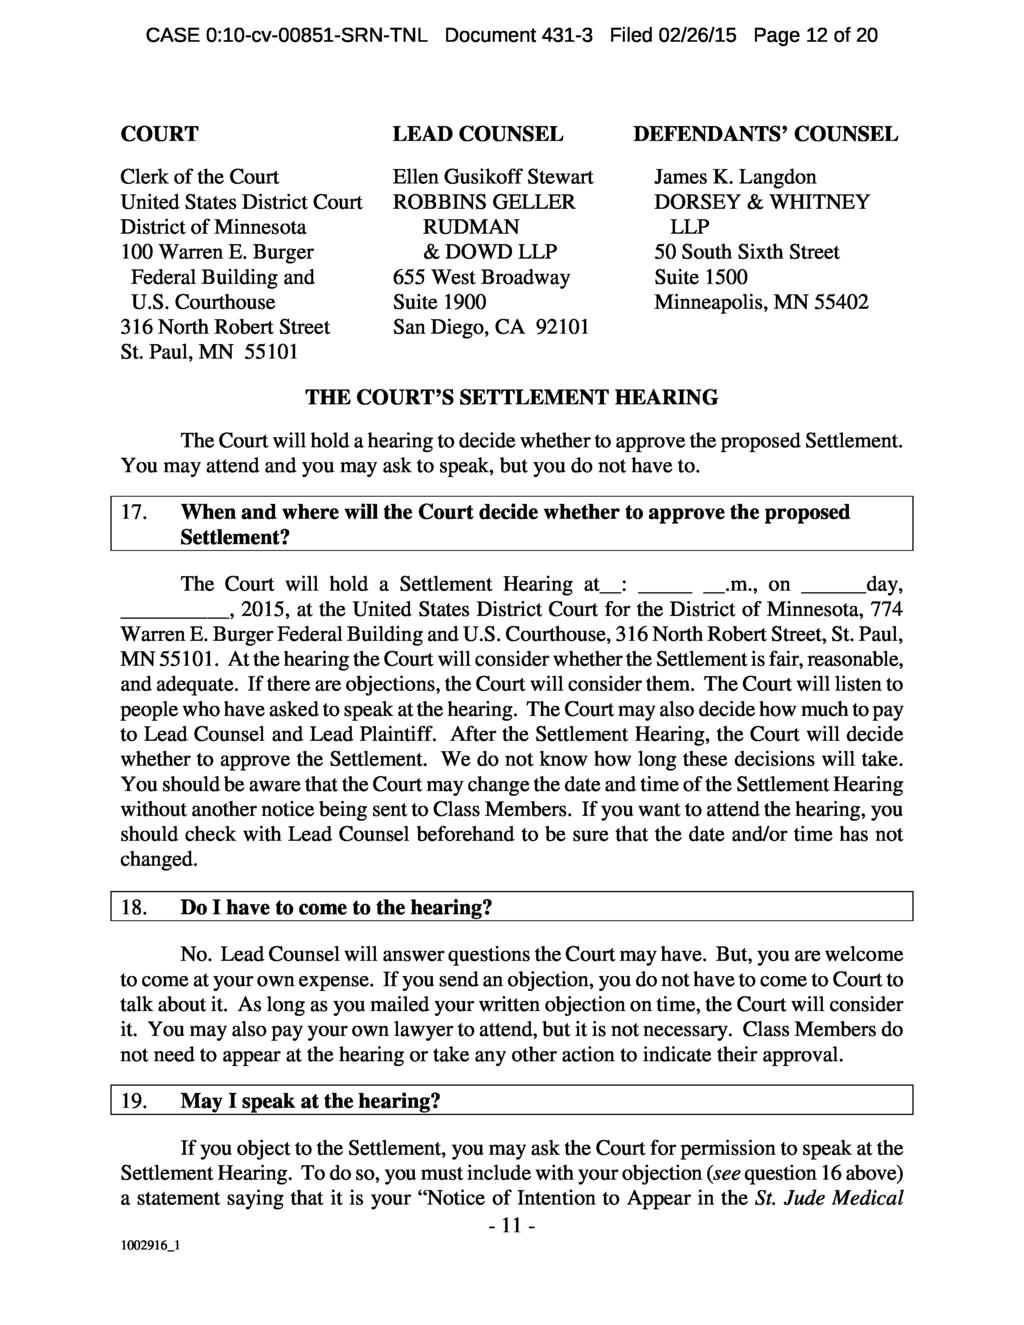 CASE 0:10-cv-00851-SRN-TNL Document 431-3 Filed 02/26/15 Page 12 of 20 COURT LEAD COUNSEL DEFENDANTS COUNSEL Clerk of the Court Ellen Gusikoff Stewart United States District Court ROBBINS GELLER